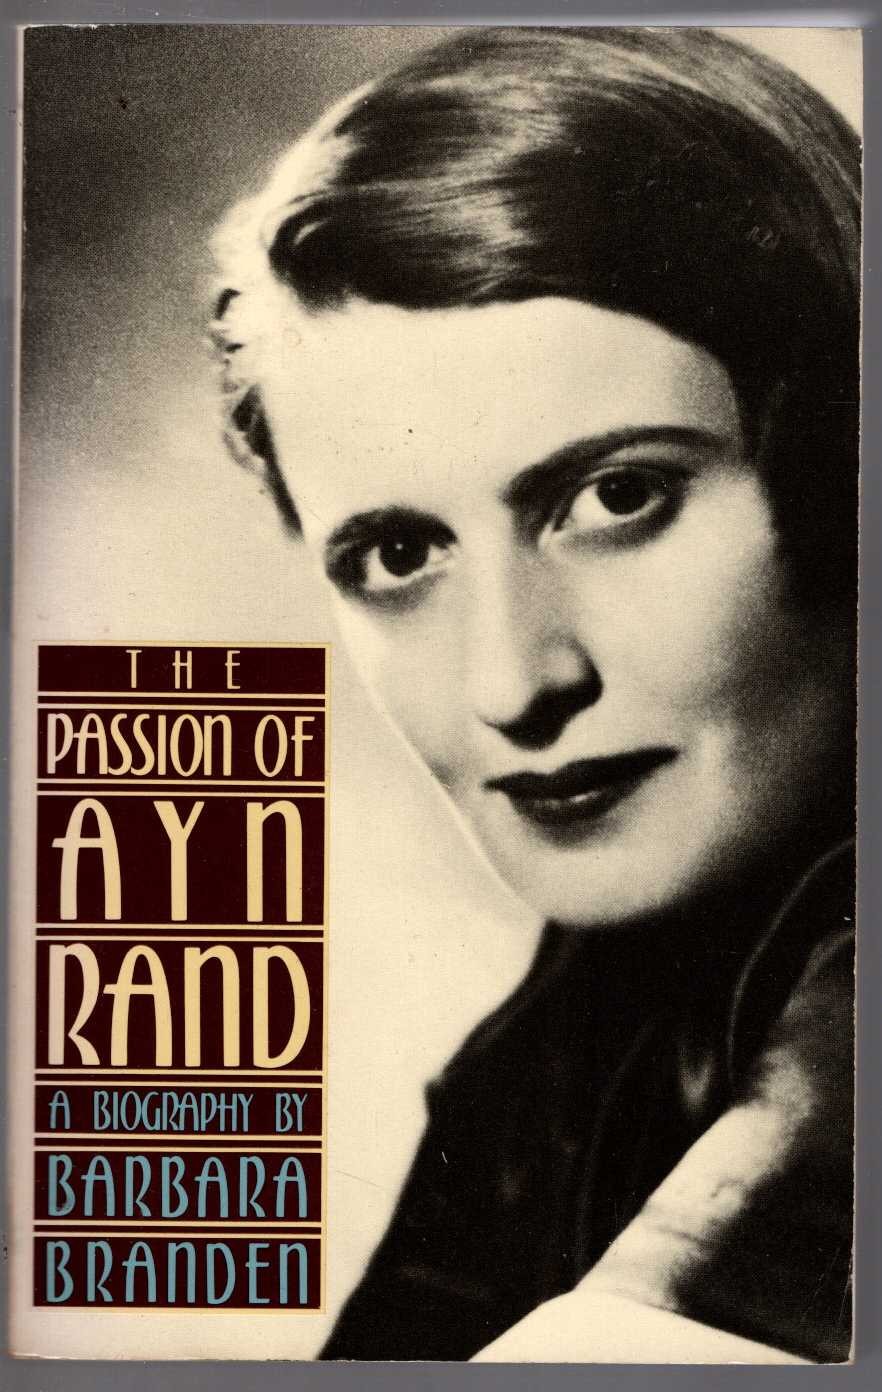 Barbara Branden  THE PASSION OF AYN RAND [BIOGRAPHY] front book cover image